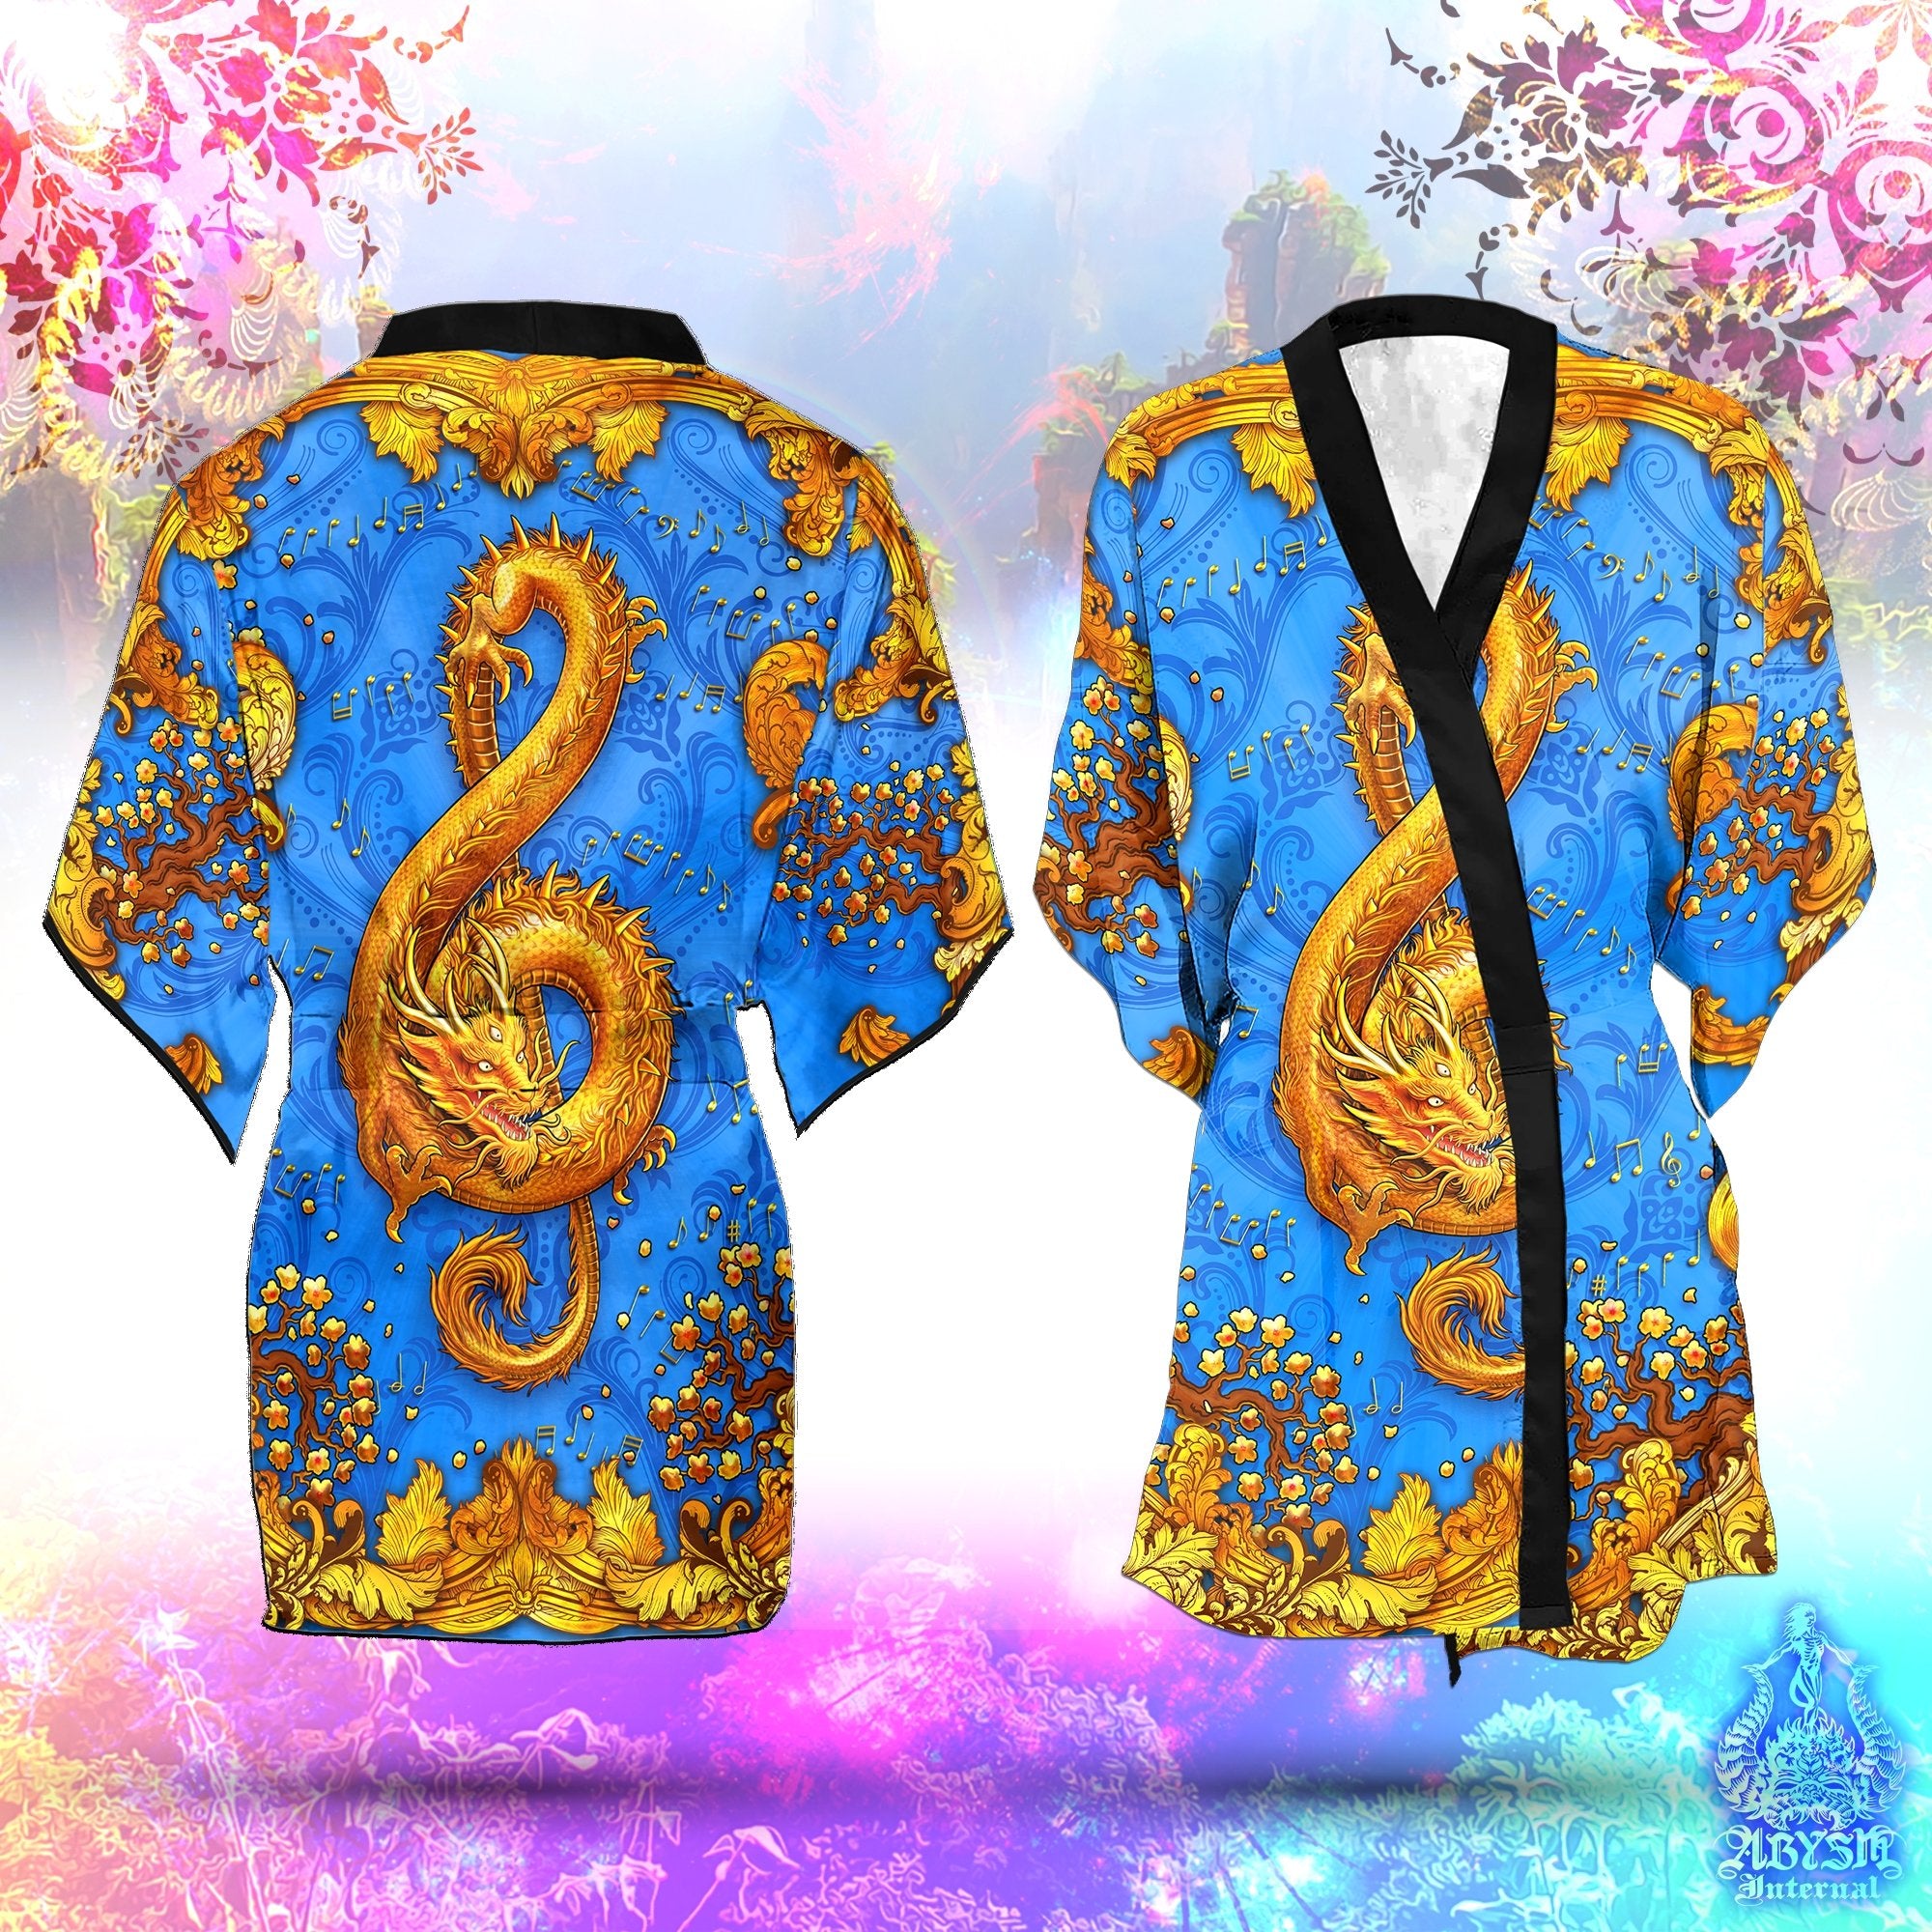 Music Cover Up, Beach Outfit, Party Kimono, Summer Festival Robe, Indie and Alternative Clothing, Unisex - Dragon, Cyan Gold - Abysm Internal